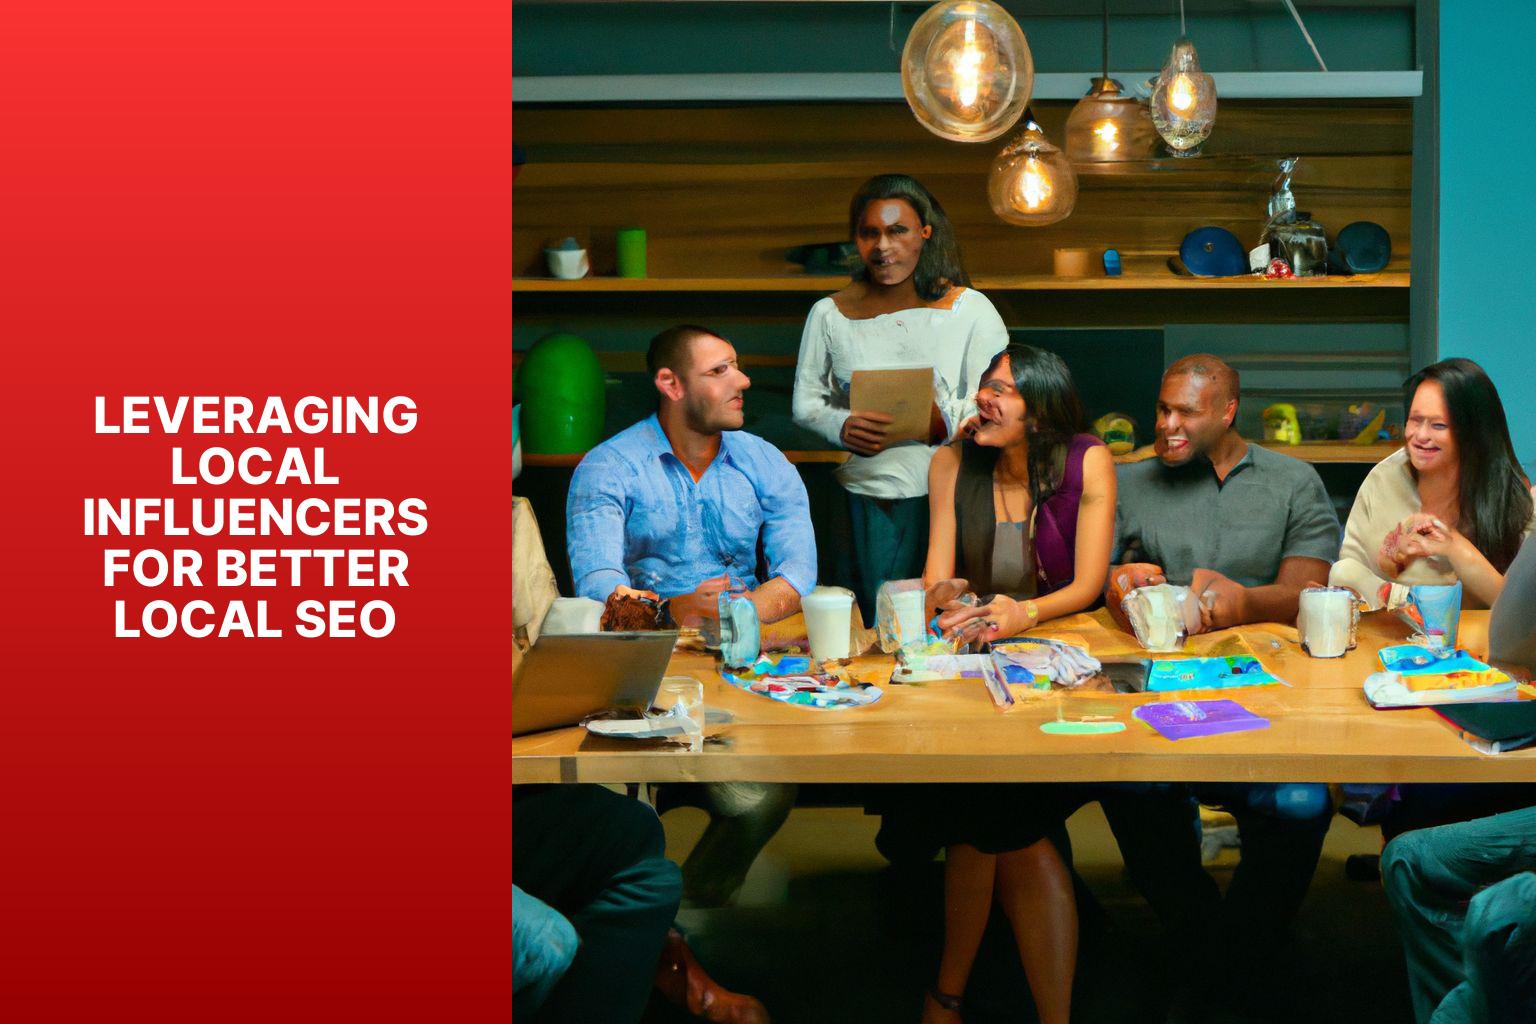 Leveraging Local Influencers for Better Local SEO